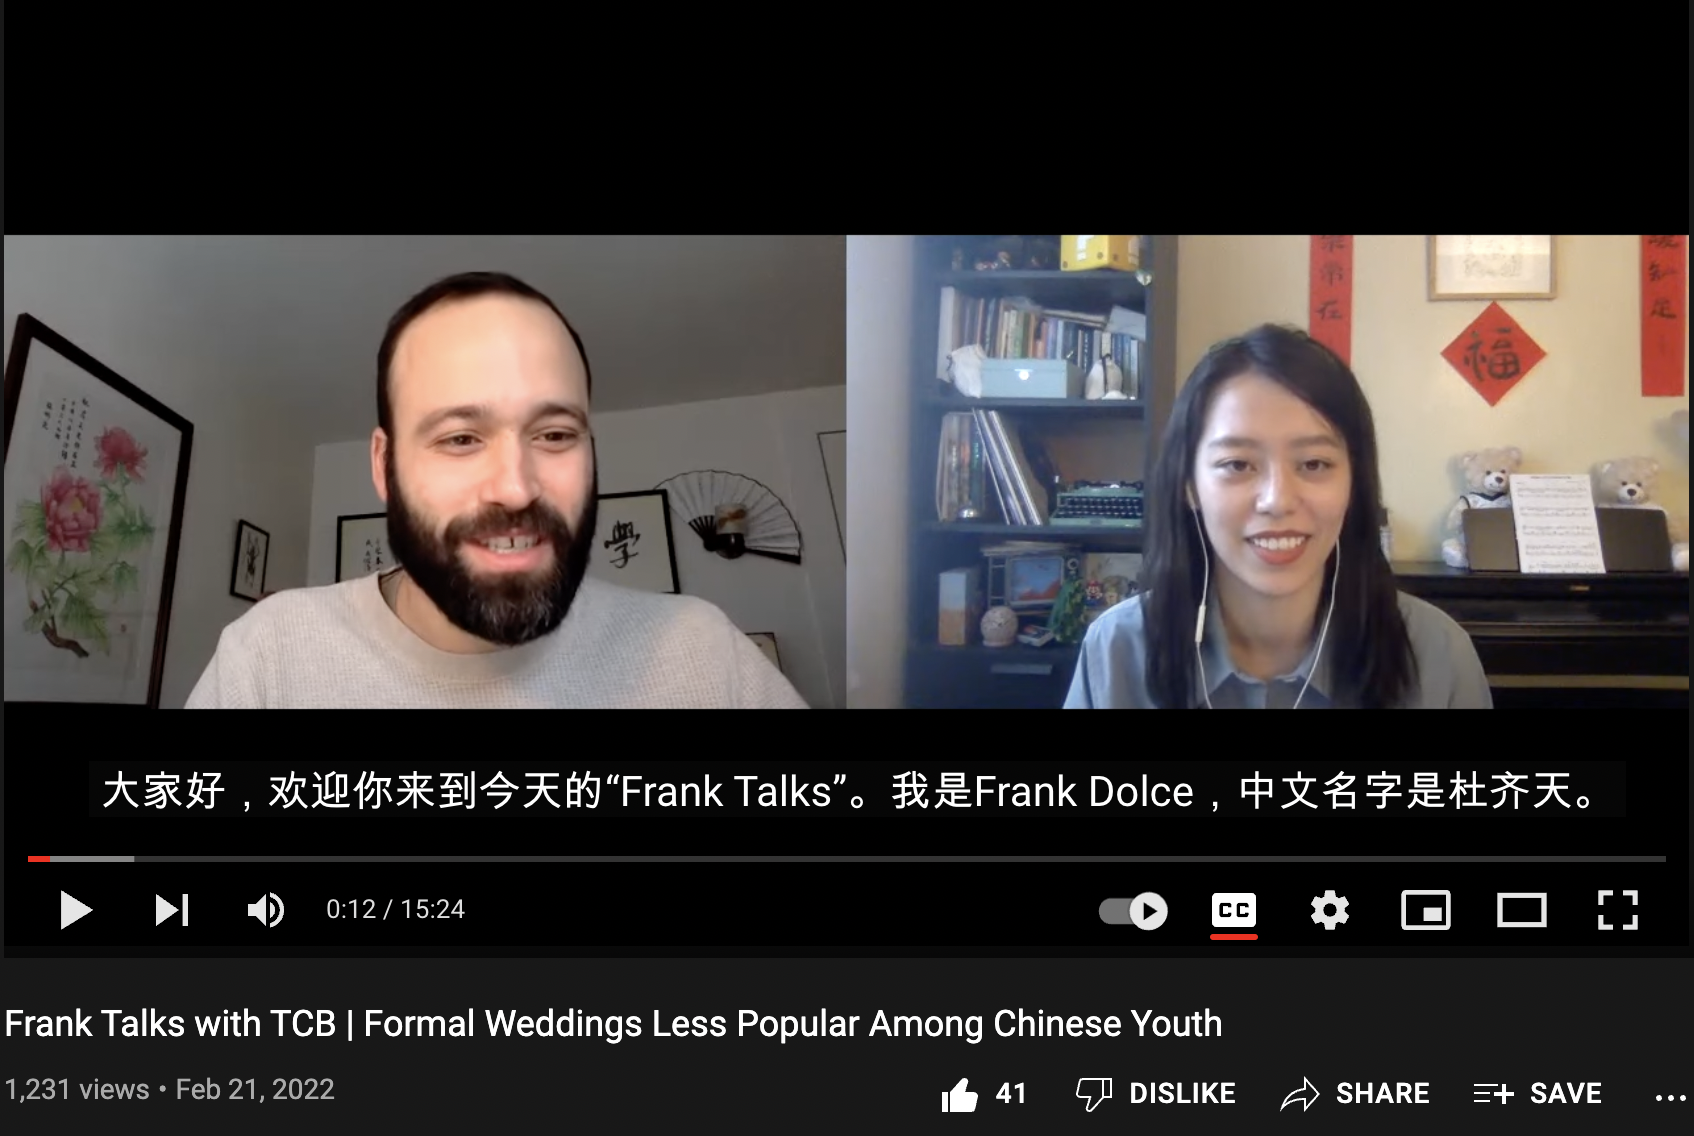 How to Use Frank Talks with TCB to Learn Chinese